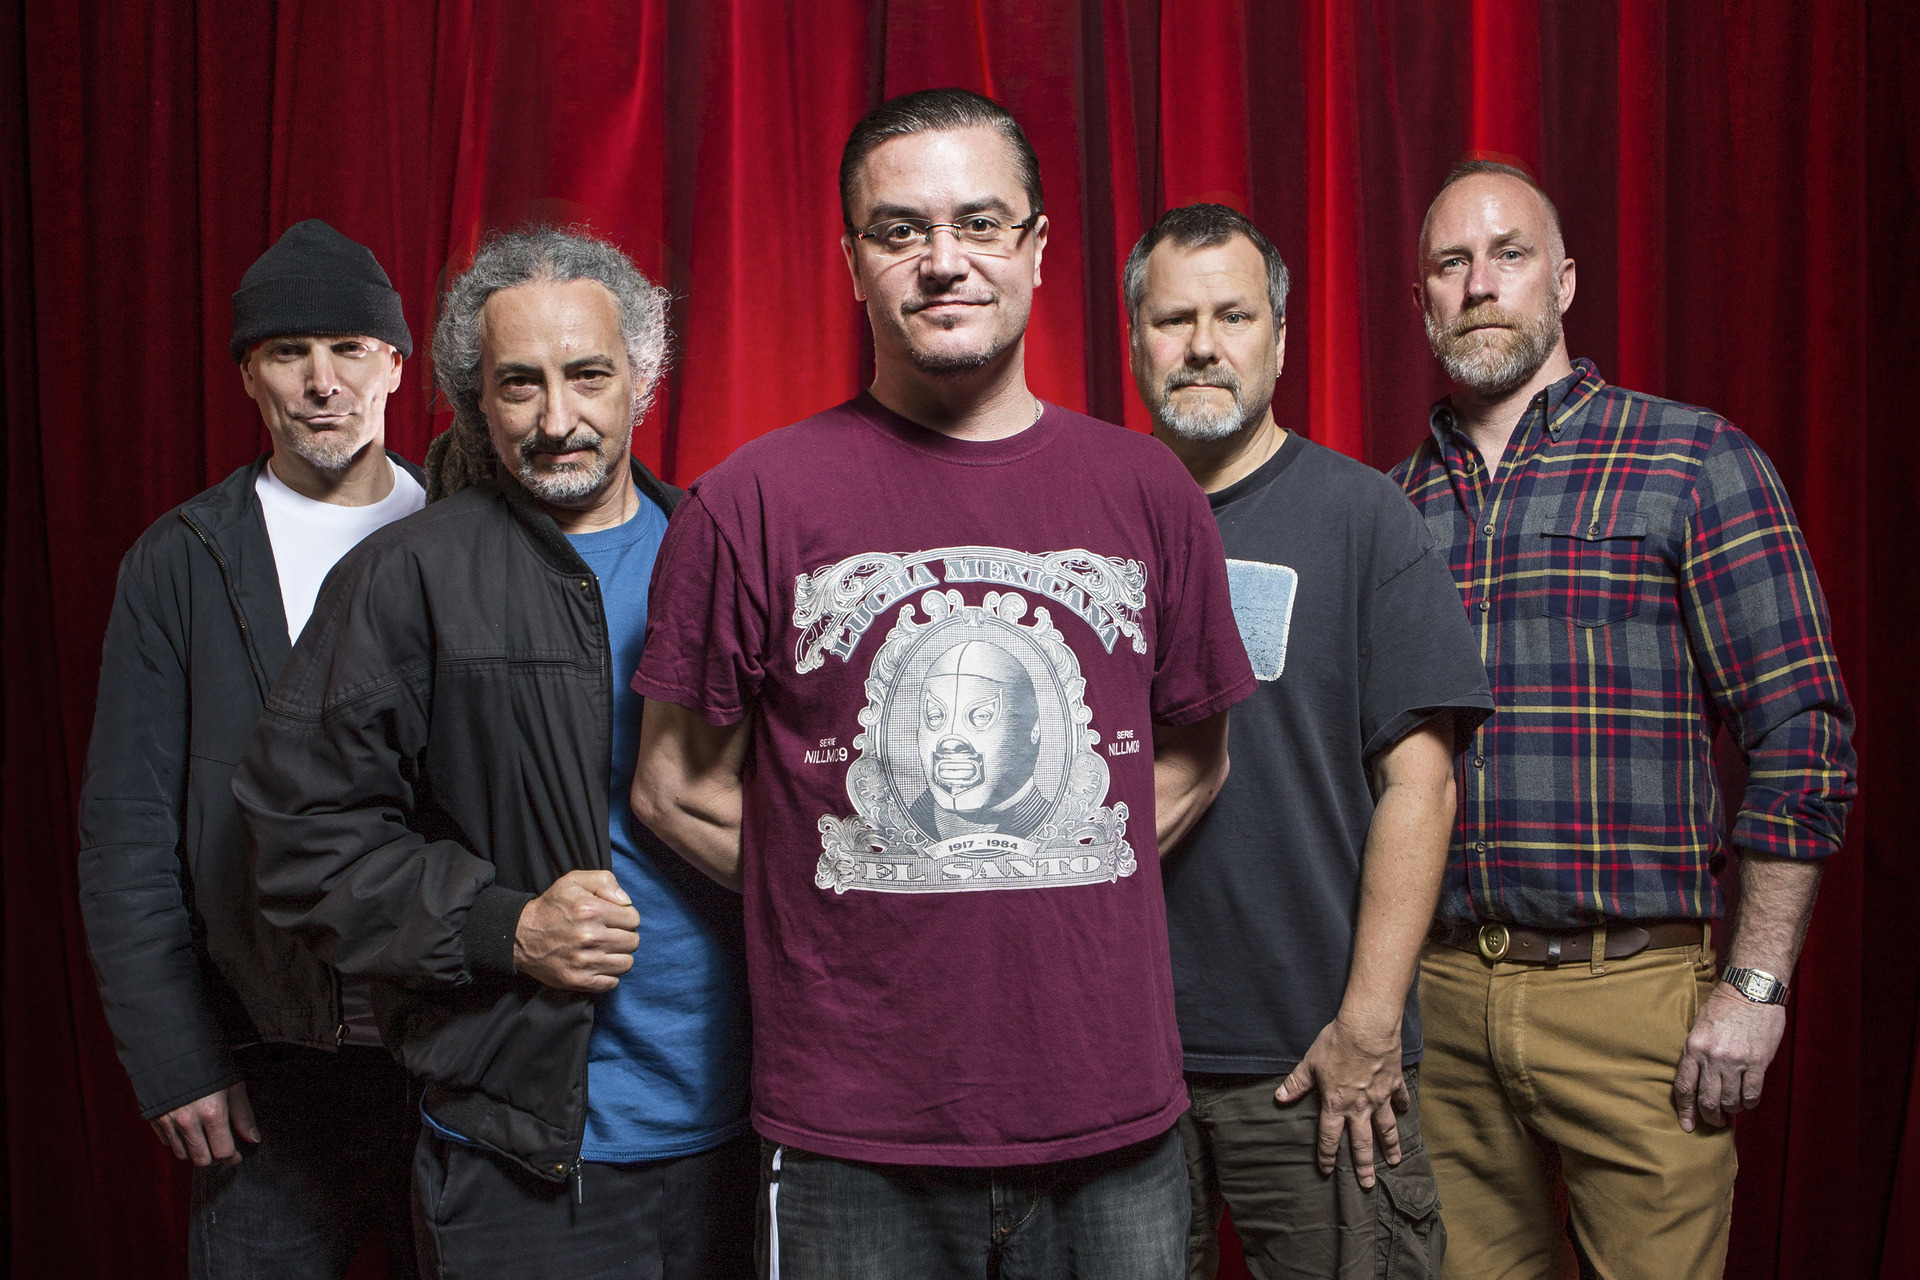 Faith No More Add Second Manchester Show (June 9); All Proceeds Donated to Australian Bushfire Relief Funds ​   　 